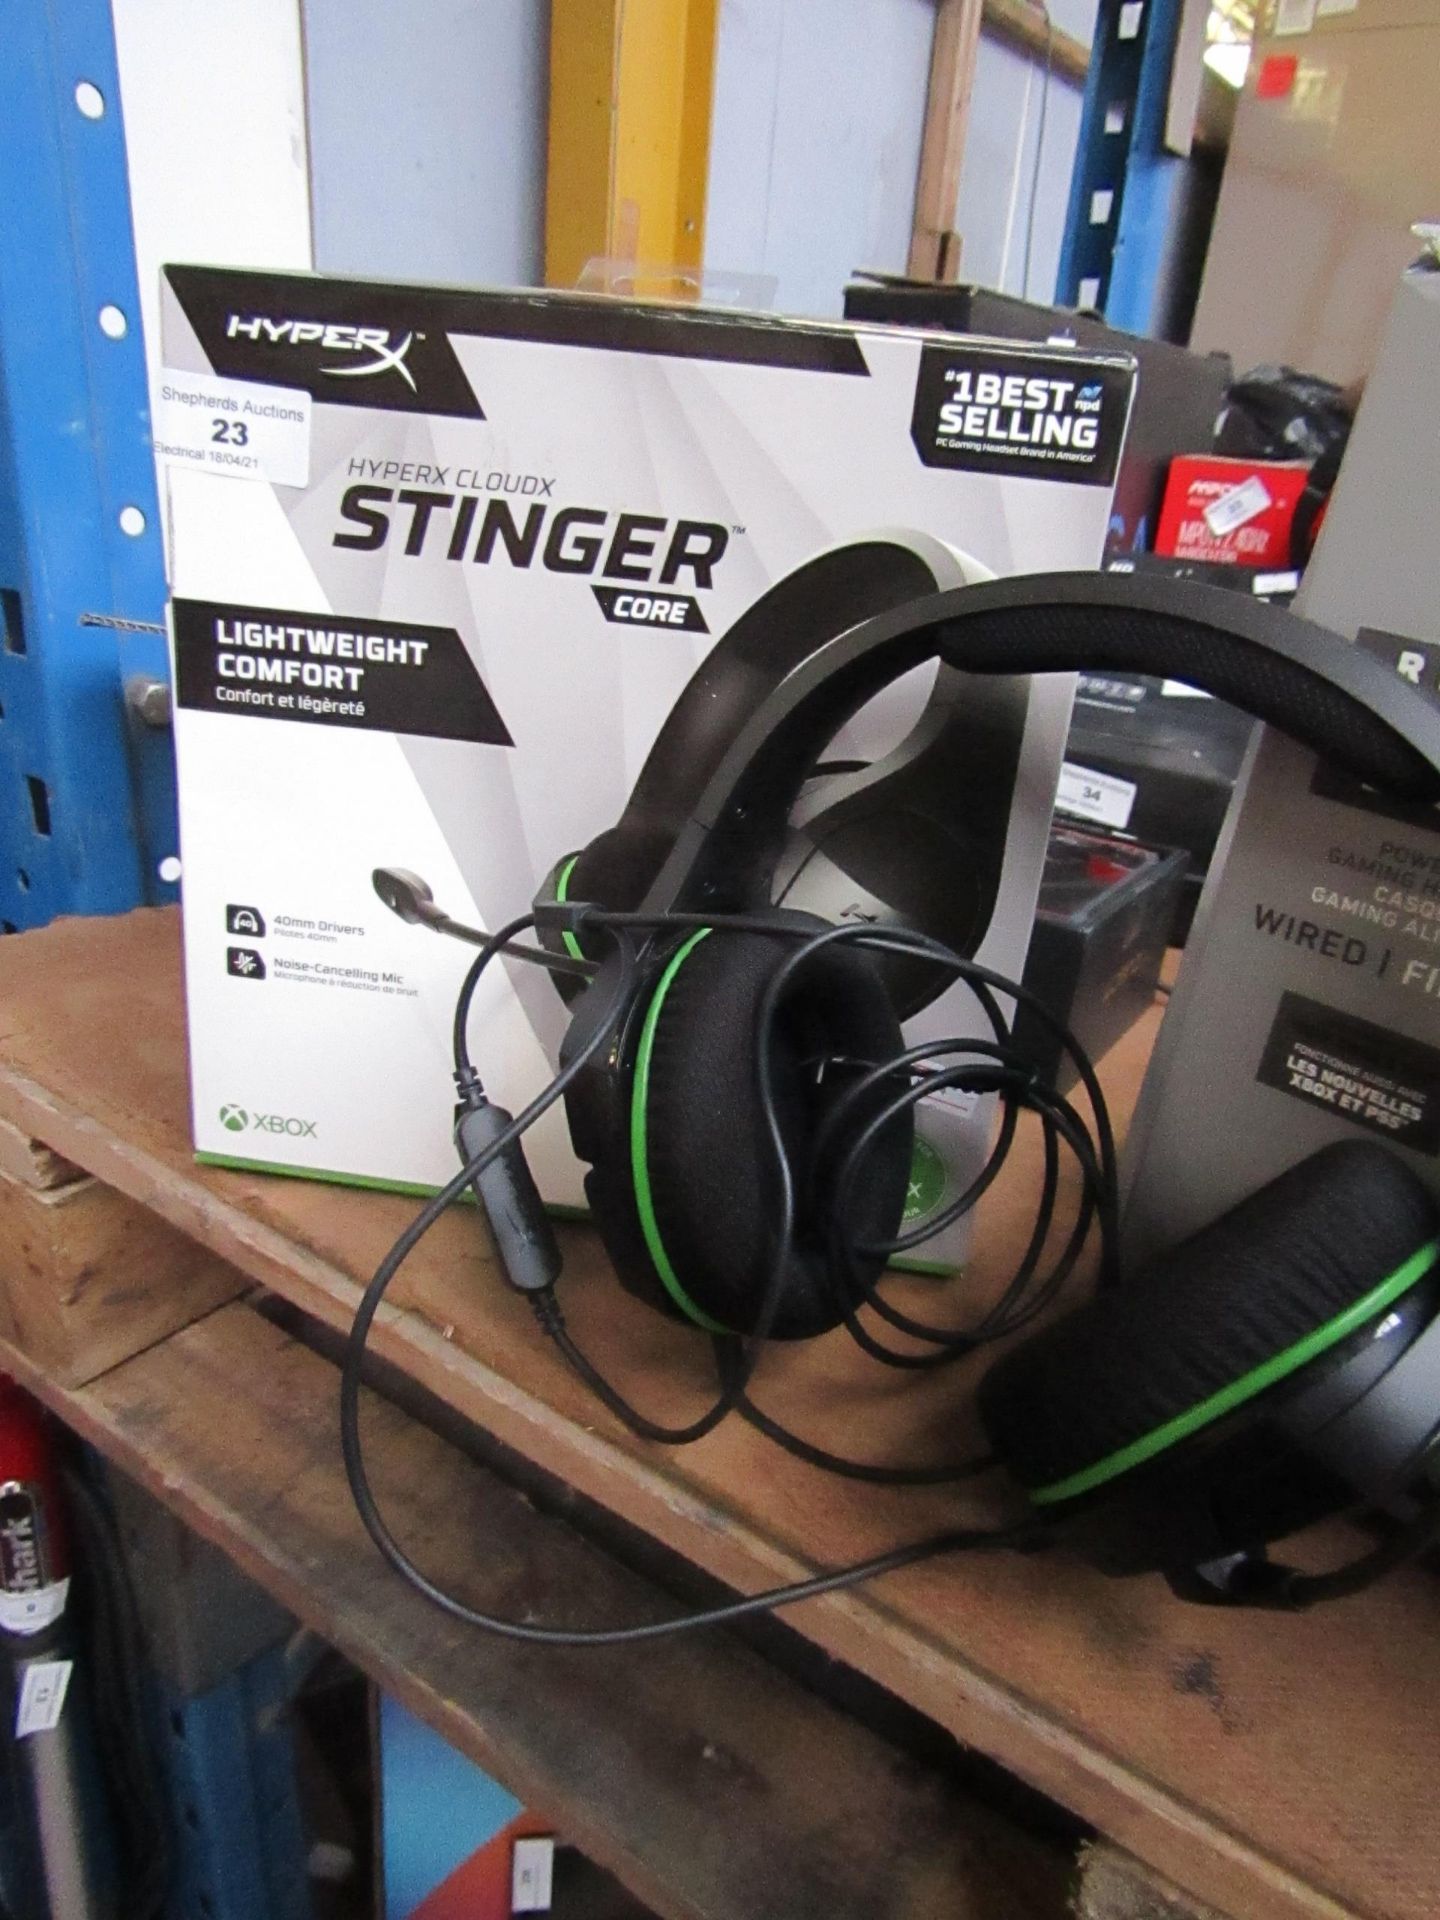 XBOX stinger headphones, tested working for sound only and boxed.